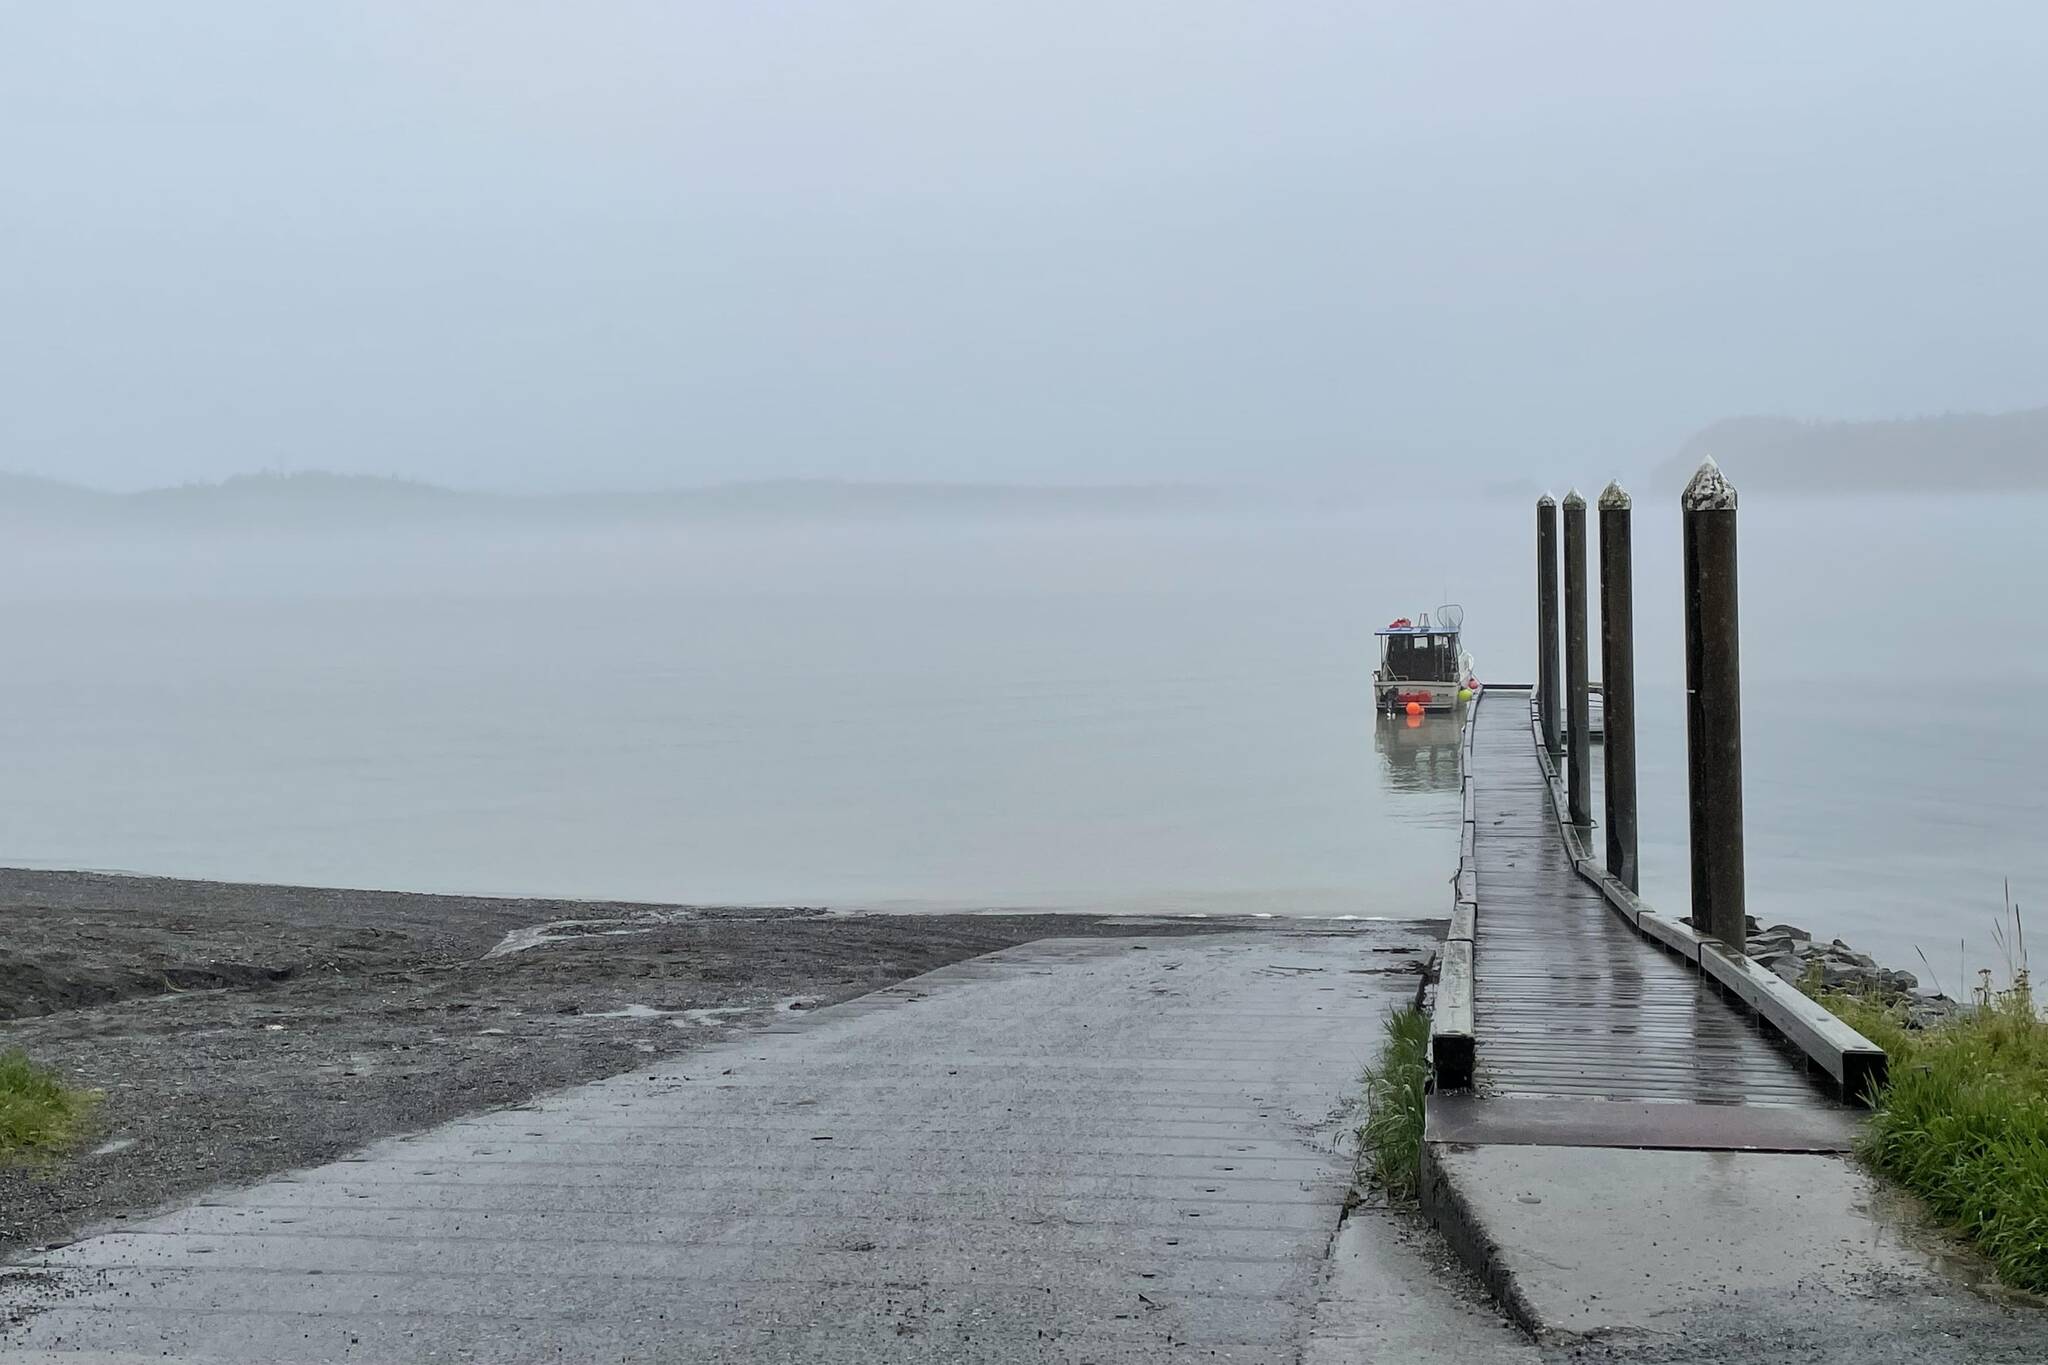 The City and Borough of Juneau's Docks and Harbors department has issued a public survey as they consider improvements to the North Douglas Boat Launch Ramp, seen here on Aug. 18, 2021. (Michael S. Lockett / Juneau Empire)